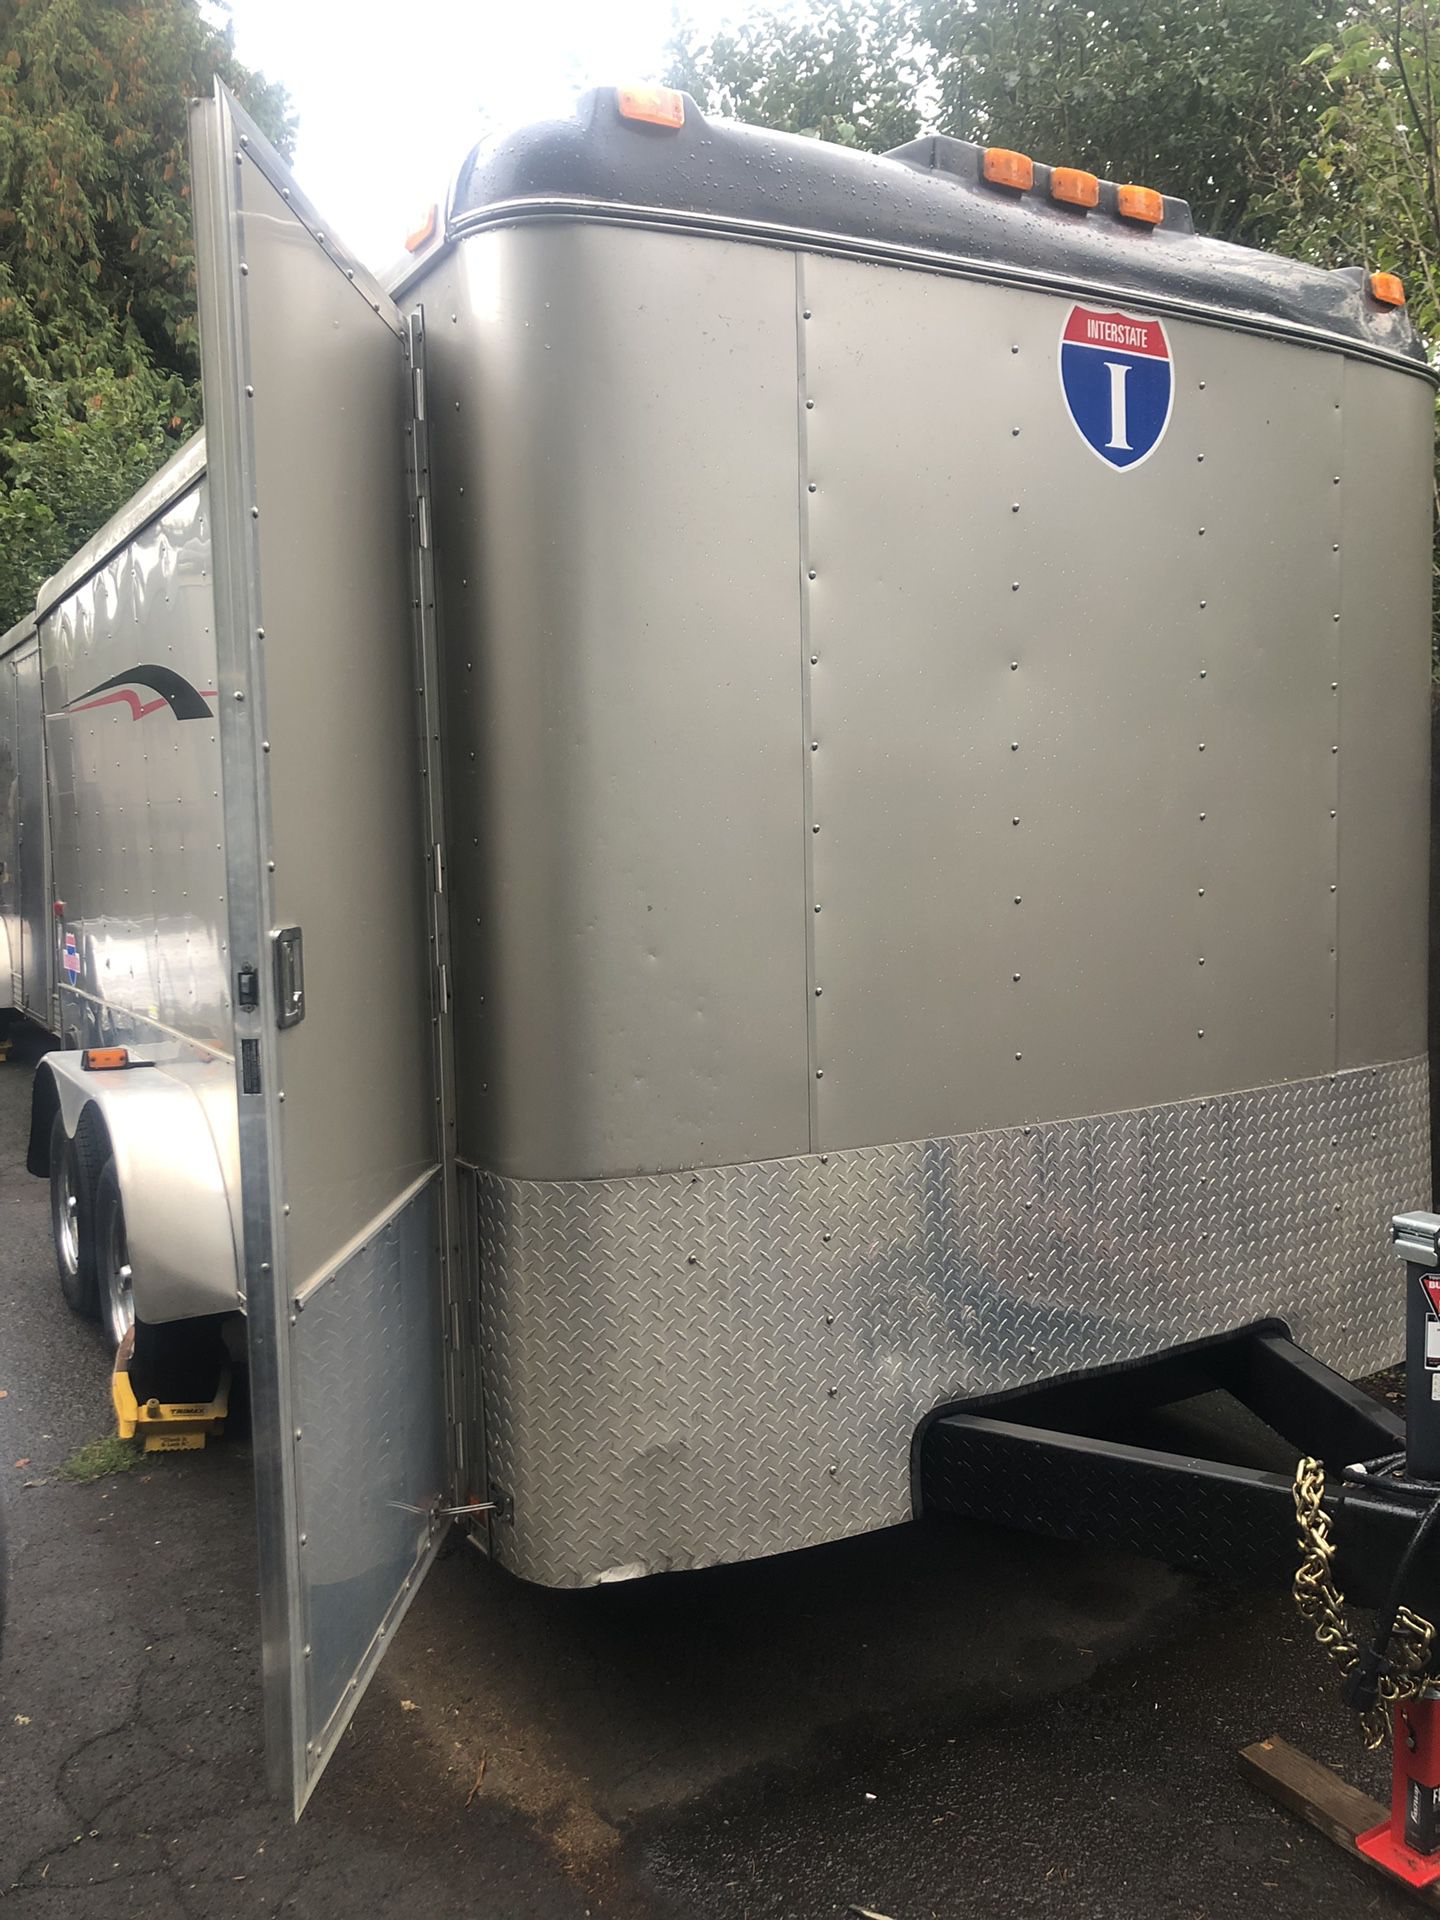 2008 interstate Pro-Series enclosed trailer 7x14x6’10” height